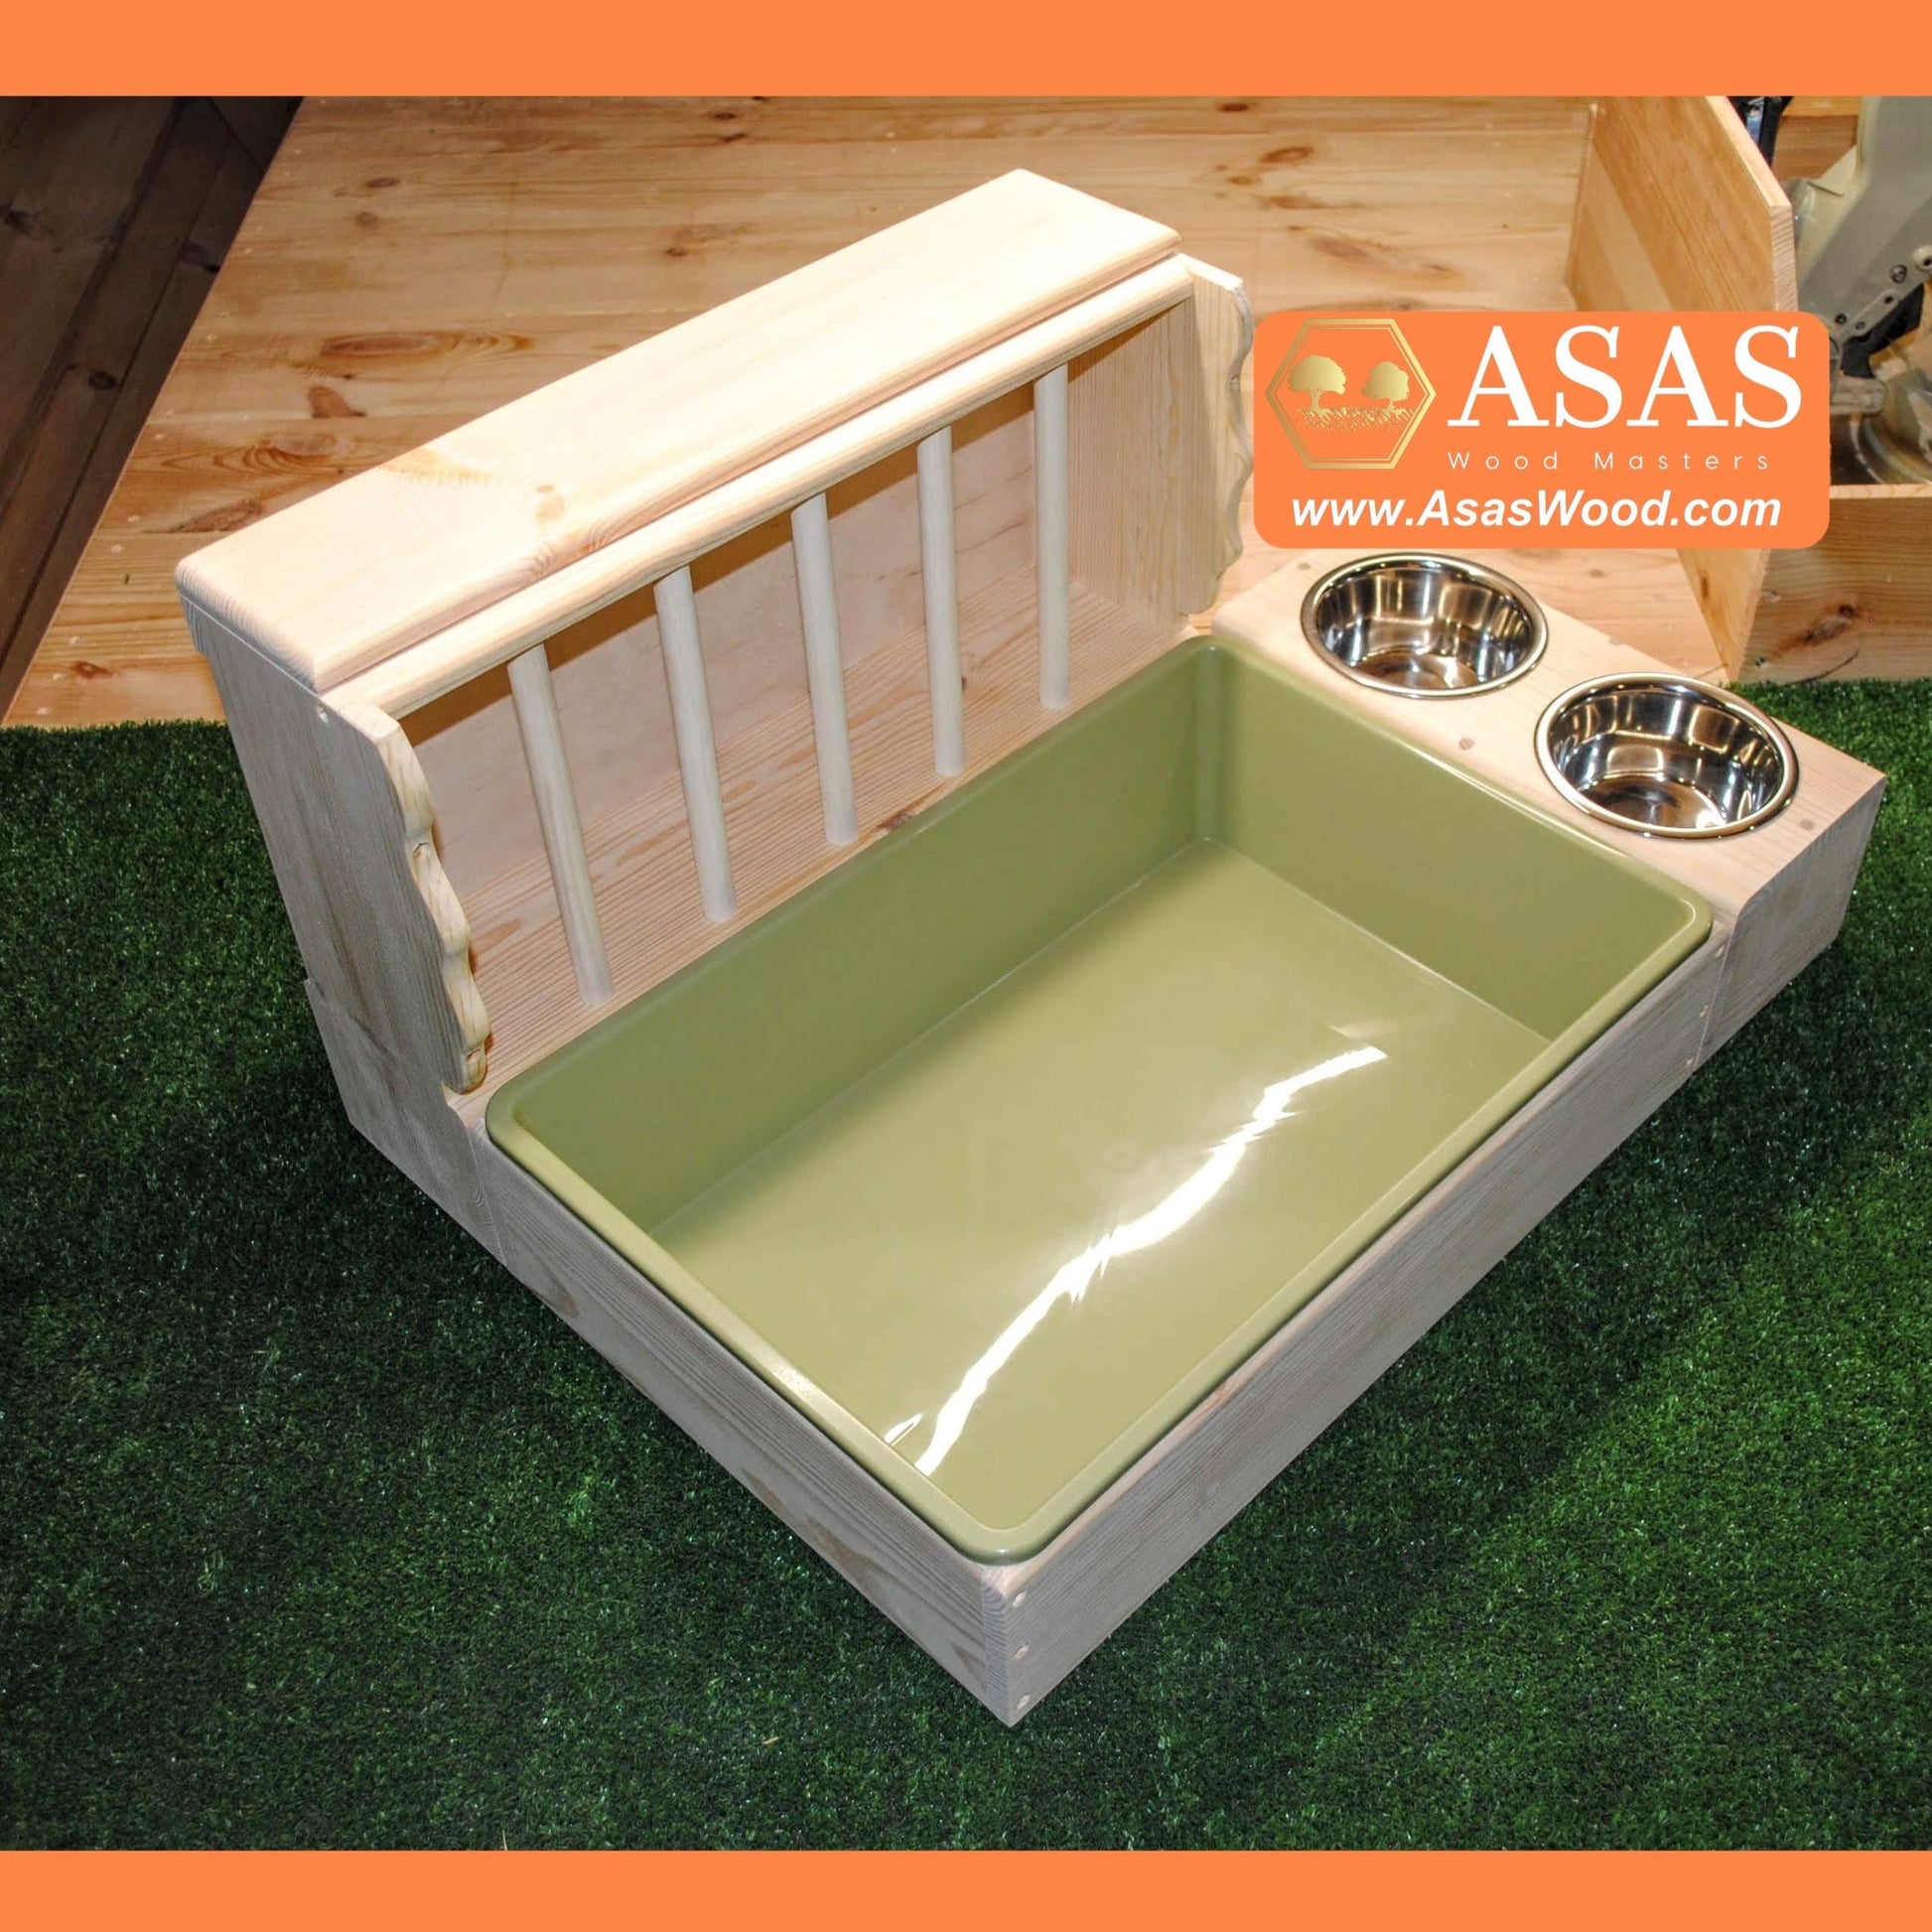 rabbit hay feeder with litter box and food / drink bowls station, large size, green color litter tray